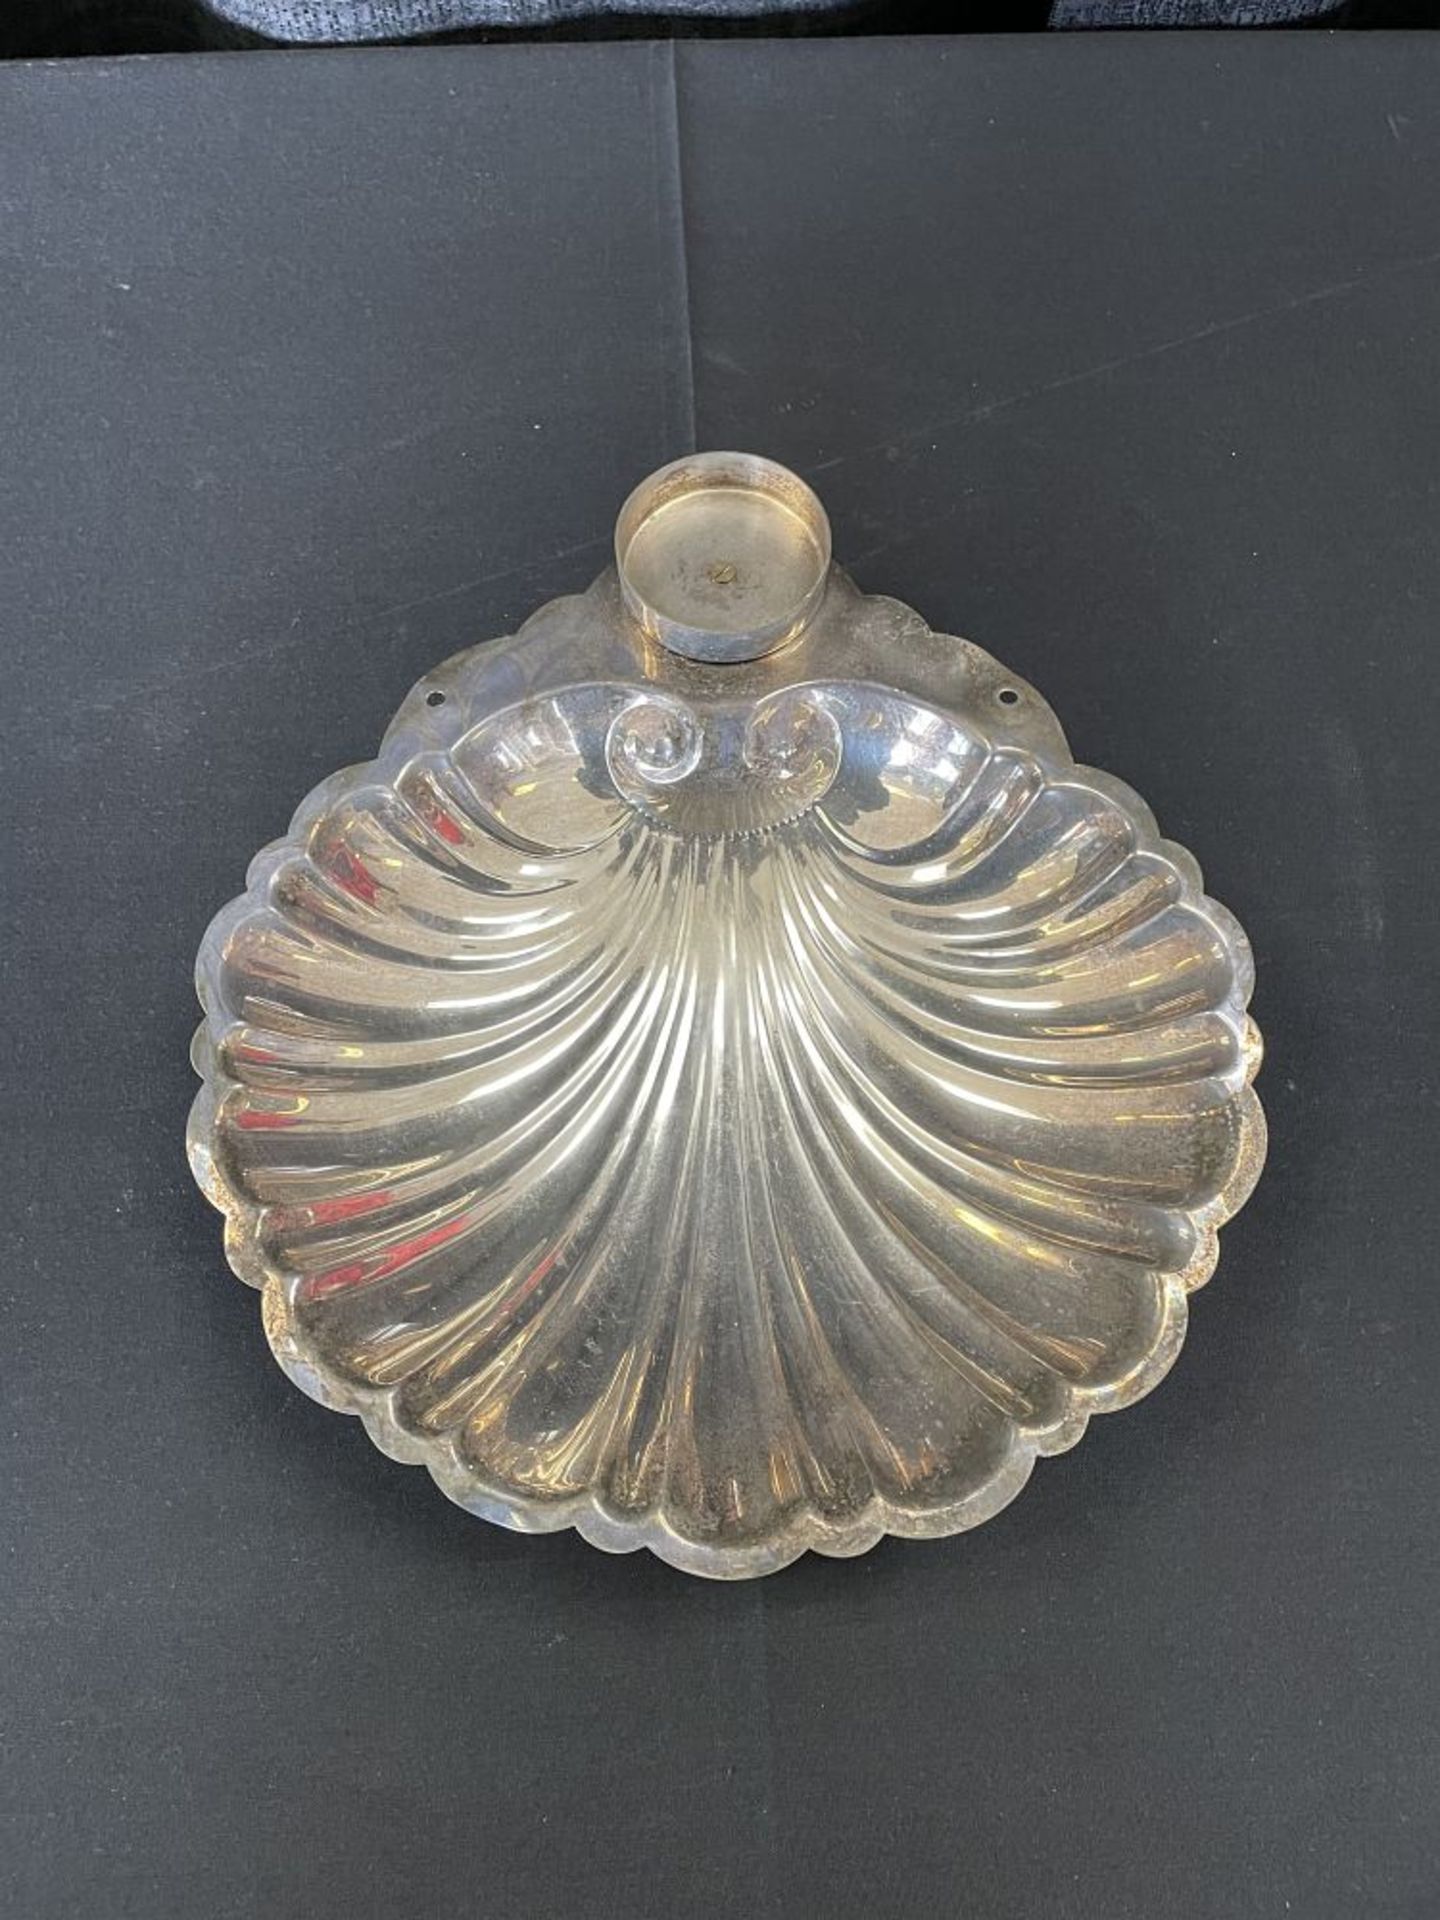 Misc Silver Plate Scalloped Serving Dish - Image 2 of 2